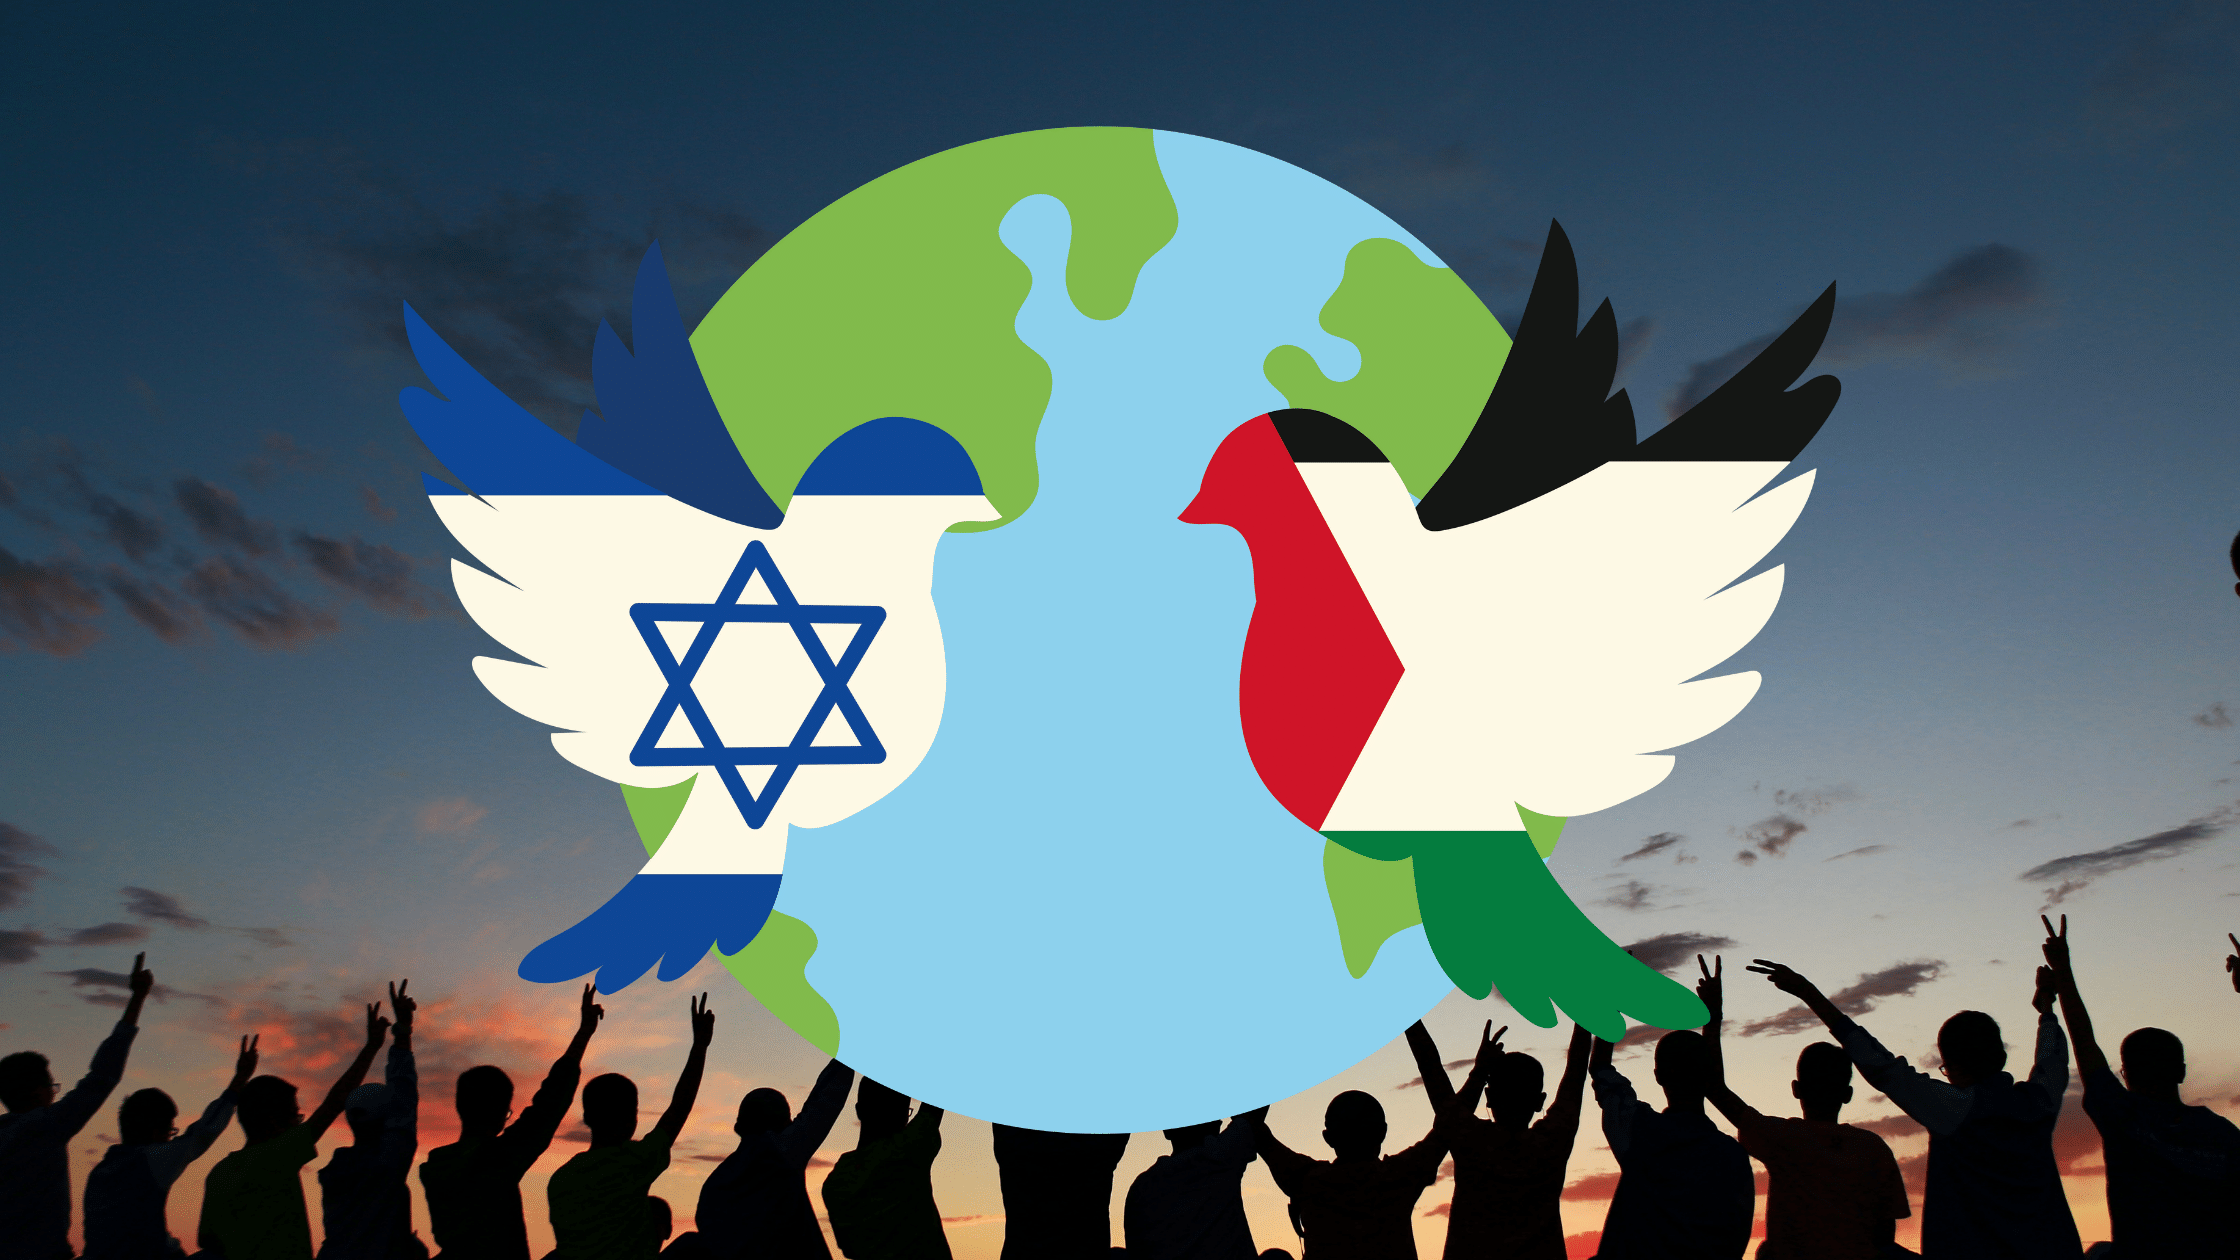 For a sustainable coexistence between Israel and Palestine